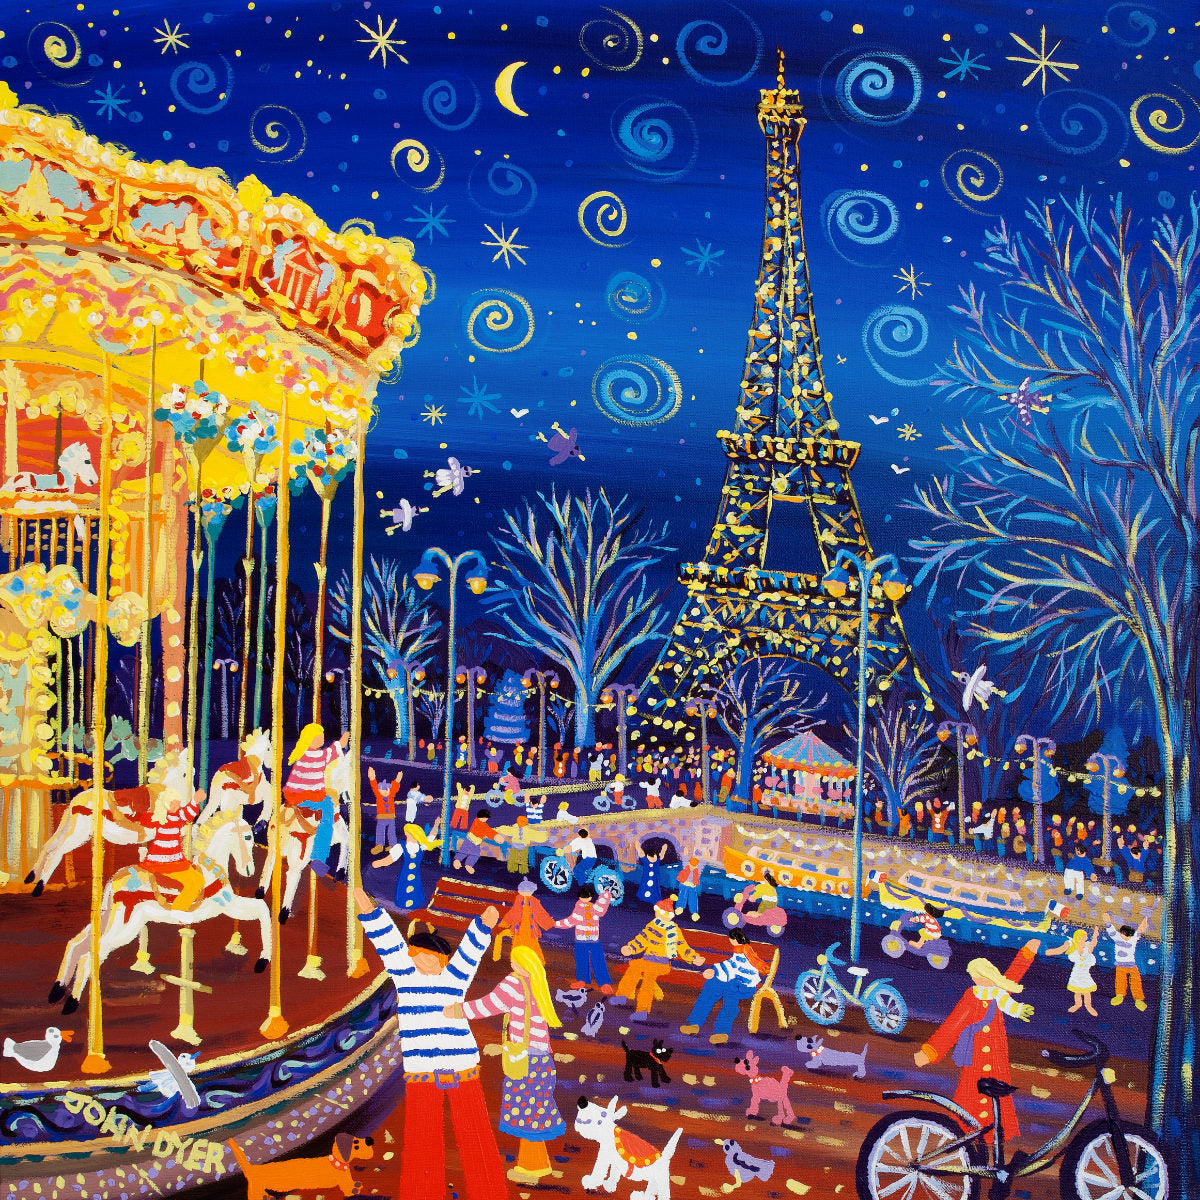 French Signed Limited Edition Print by John Dyer. &#39;Twinkling Lights and Carousel Delights, Paris.&#39; Eiffel Tower Art